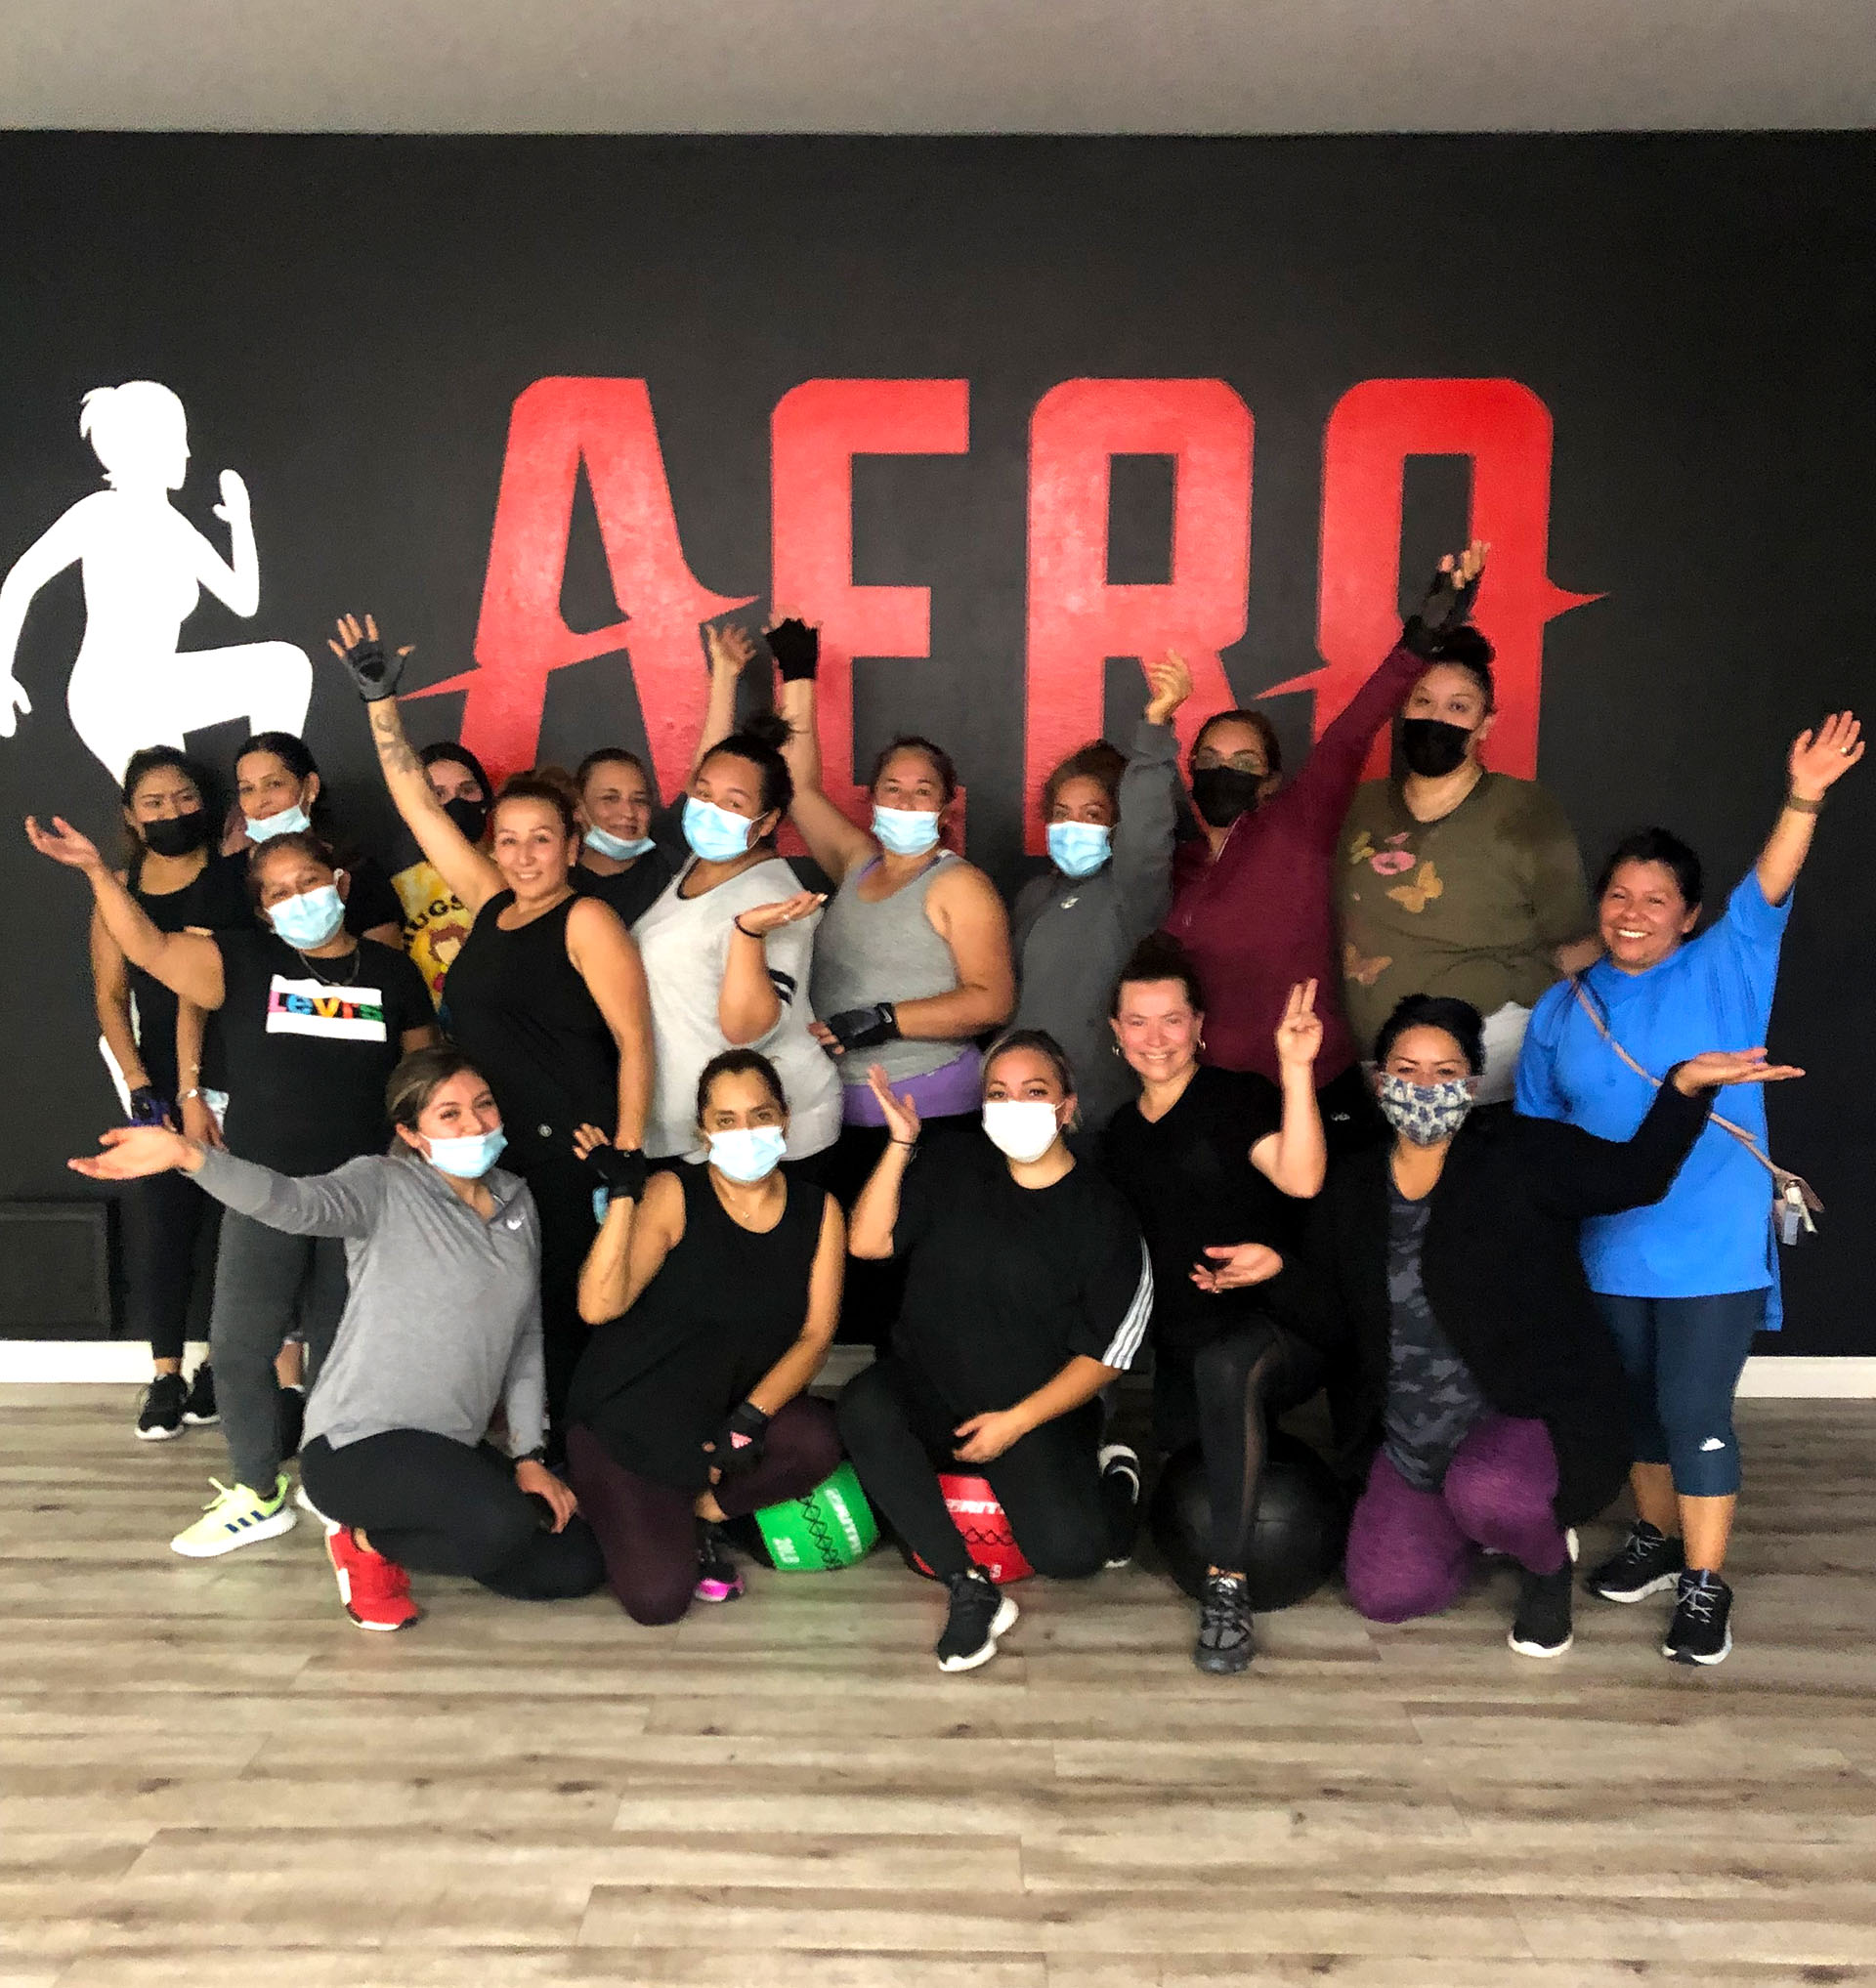 Aero gym-goers in front of the logo painted onto the gym's wall